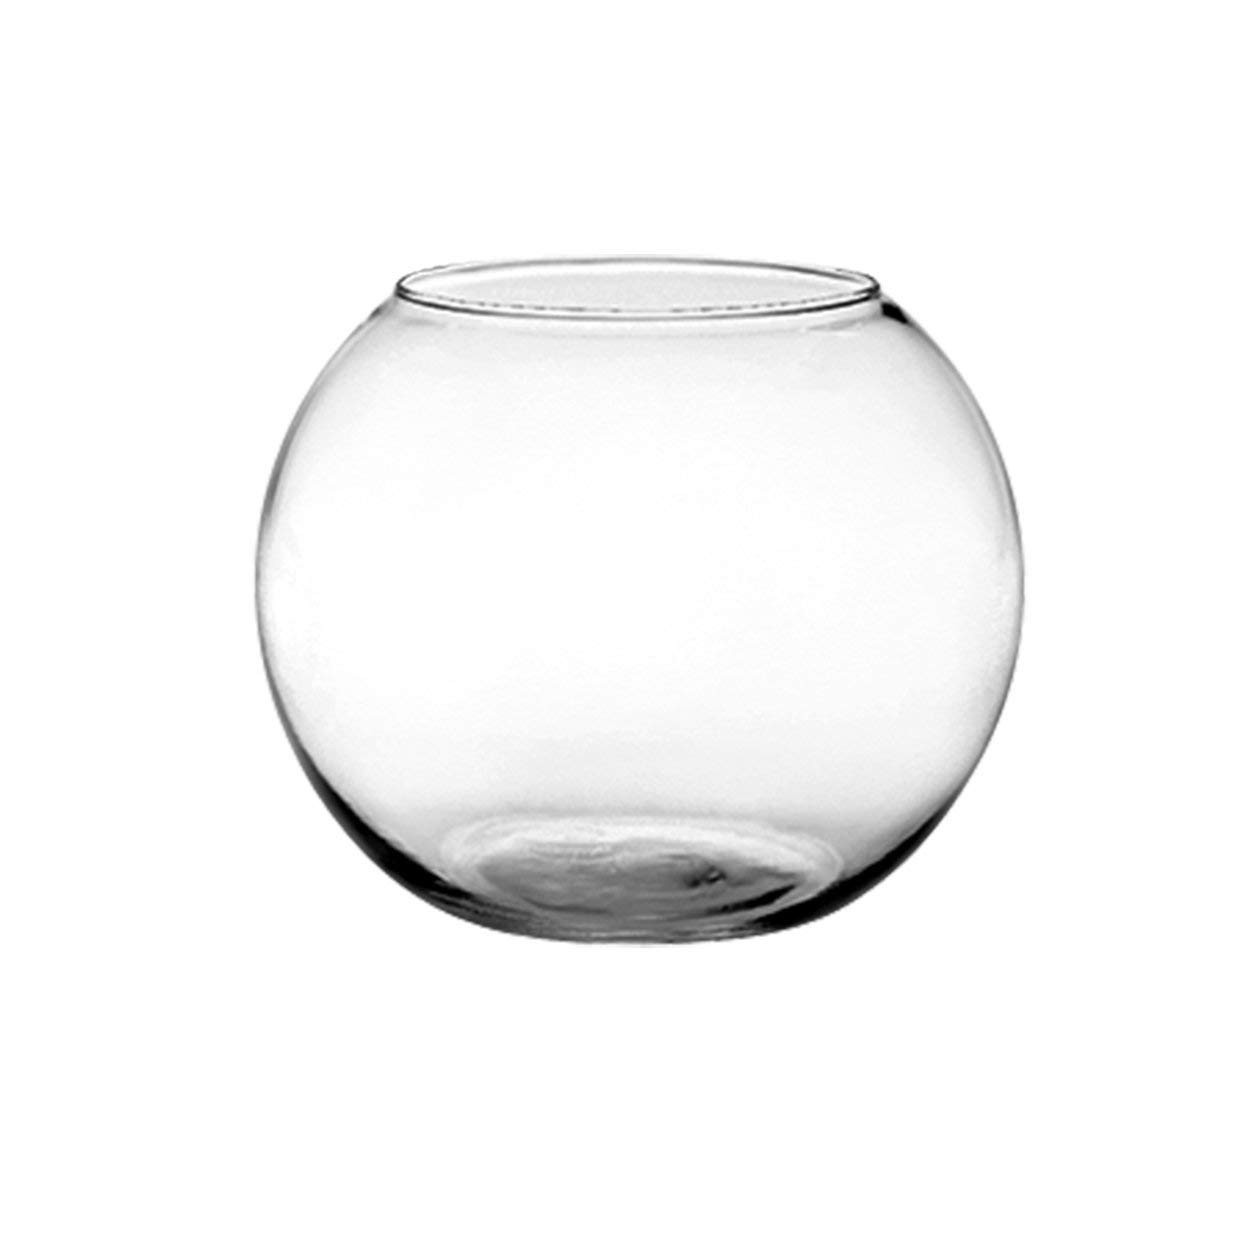 28 Awesome Large Round Clear Glass Vase 2023 free download large round clear glass vase of amazon com set of 4 syndicate sales 6 inches clear rose bowl inside amazon com set of 4 syndicate sales 6 inches clear rose bowl bundled by maven gifts garden